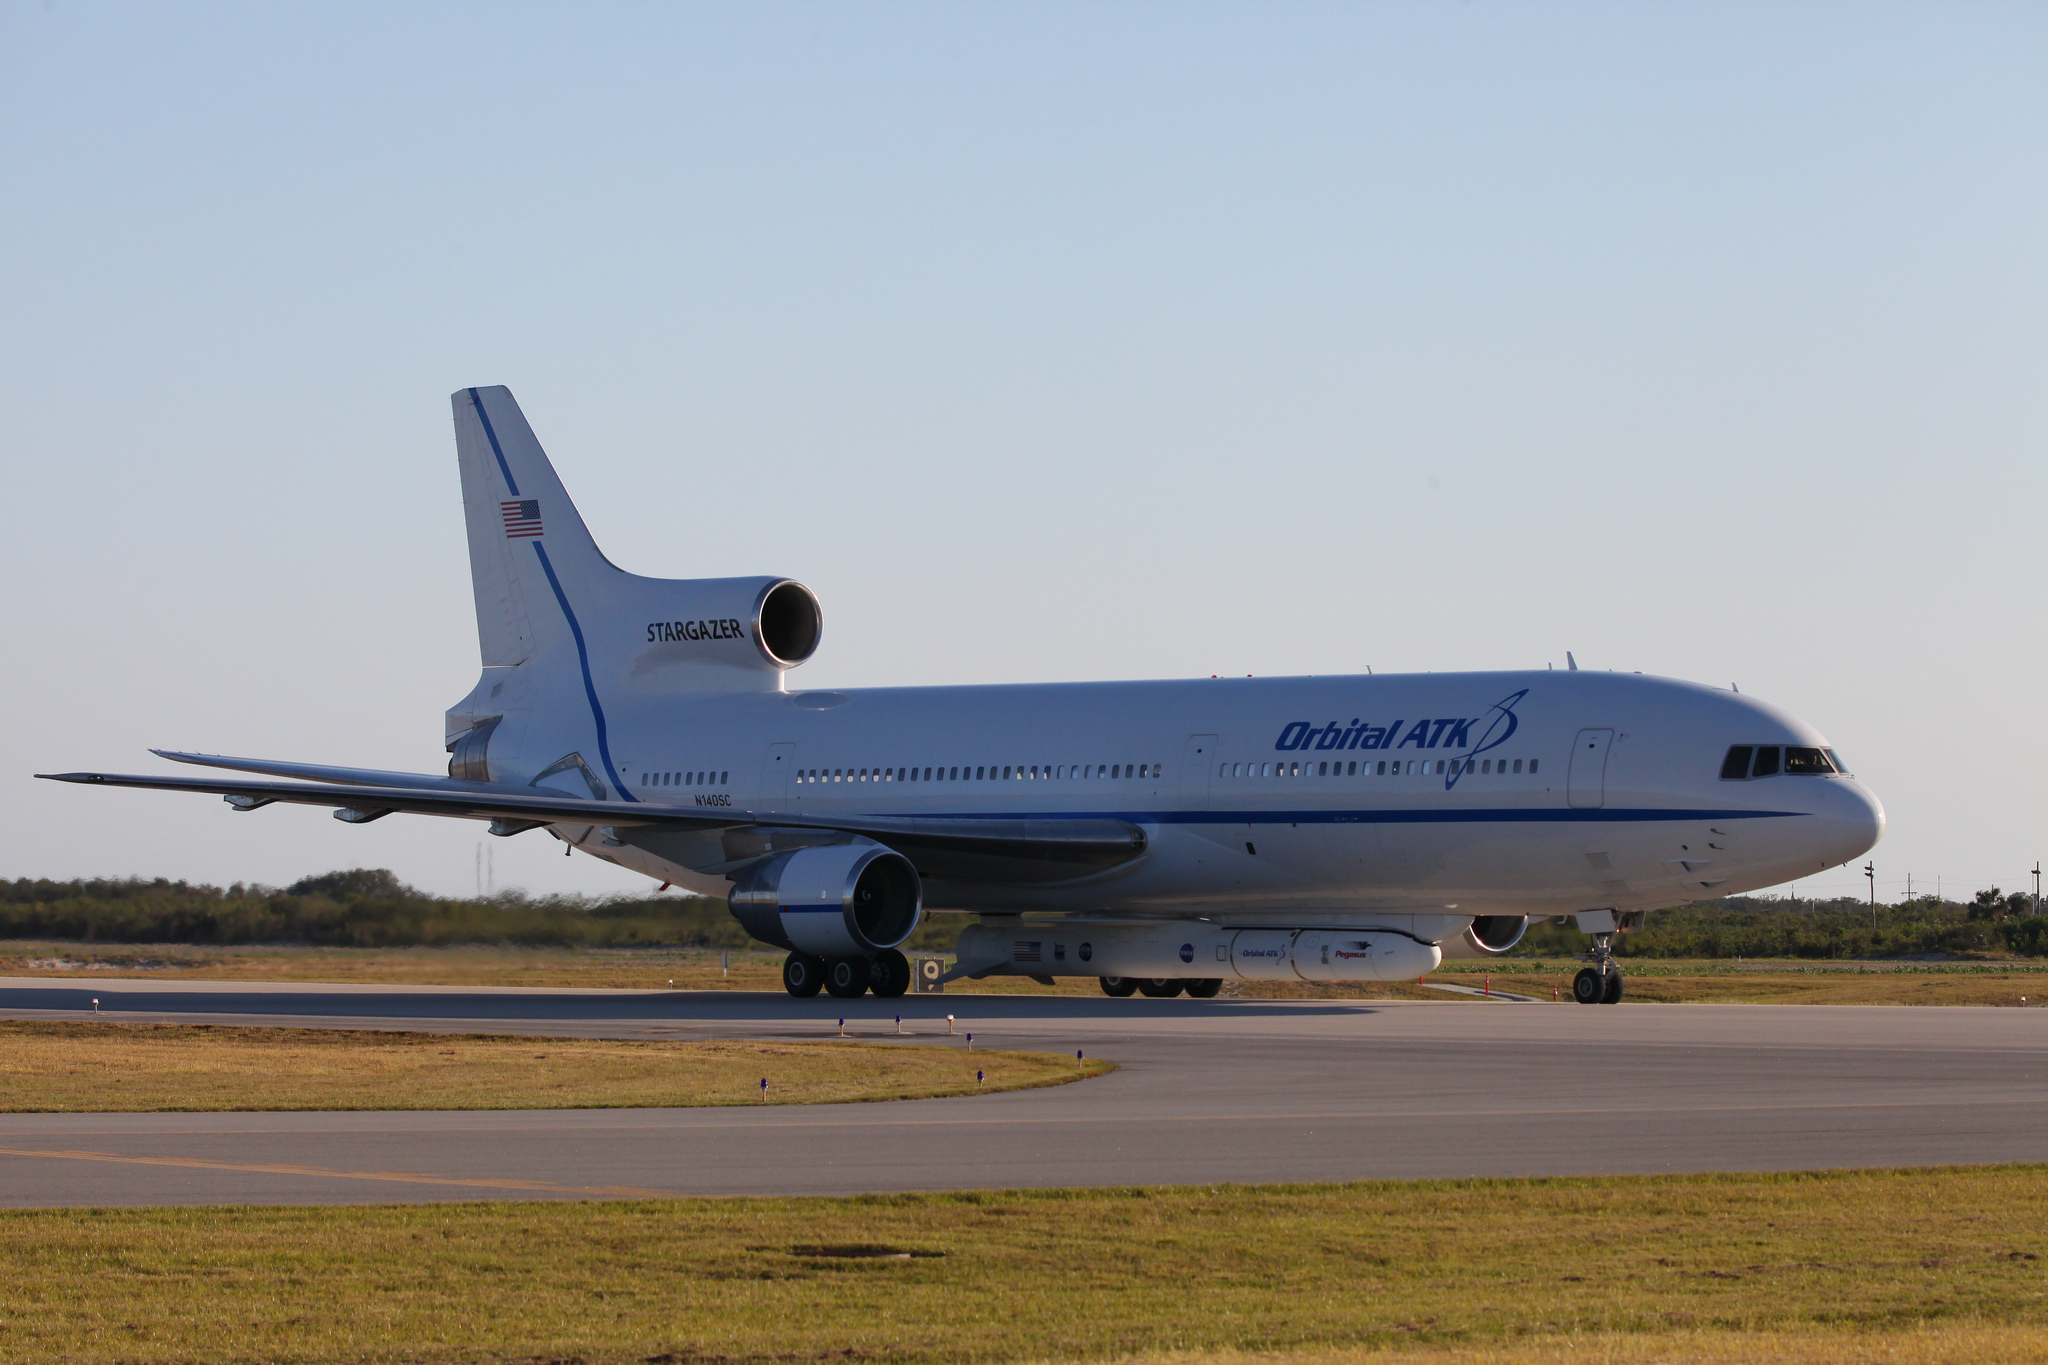 The Orbital ATK L-1011 Stargazer aircraft arrives at the Skid Strip at Cape Canaveral Air Force Station in Florida